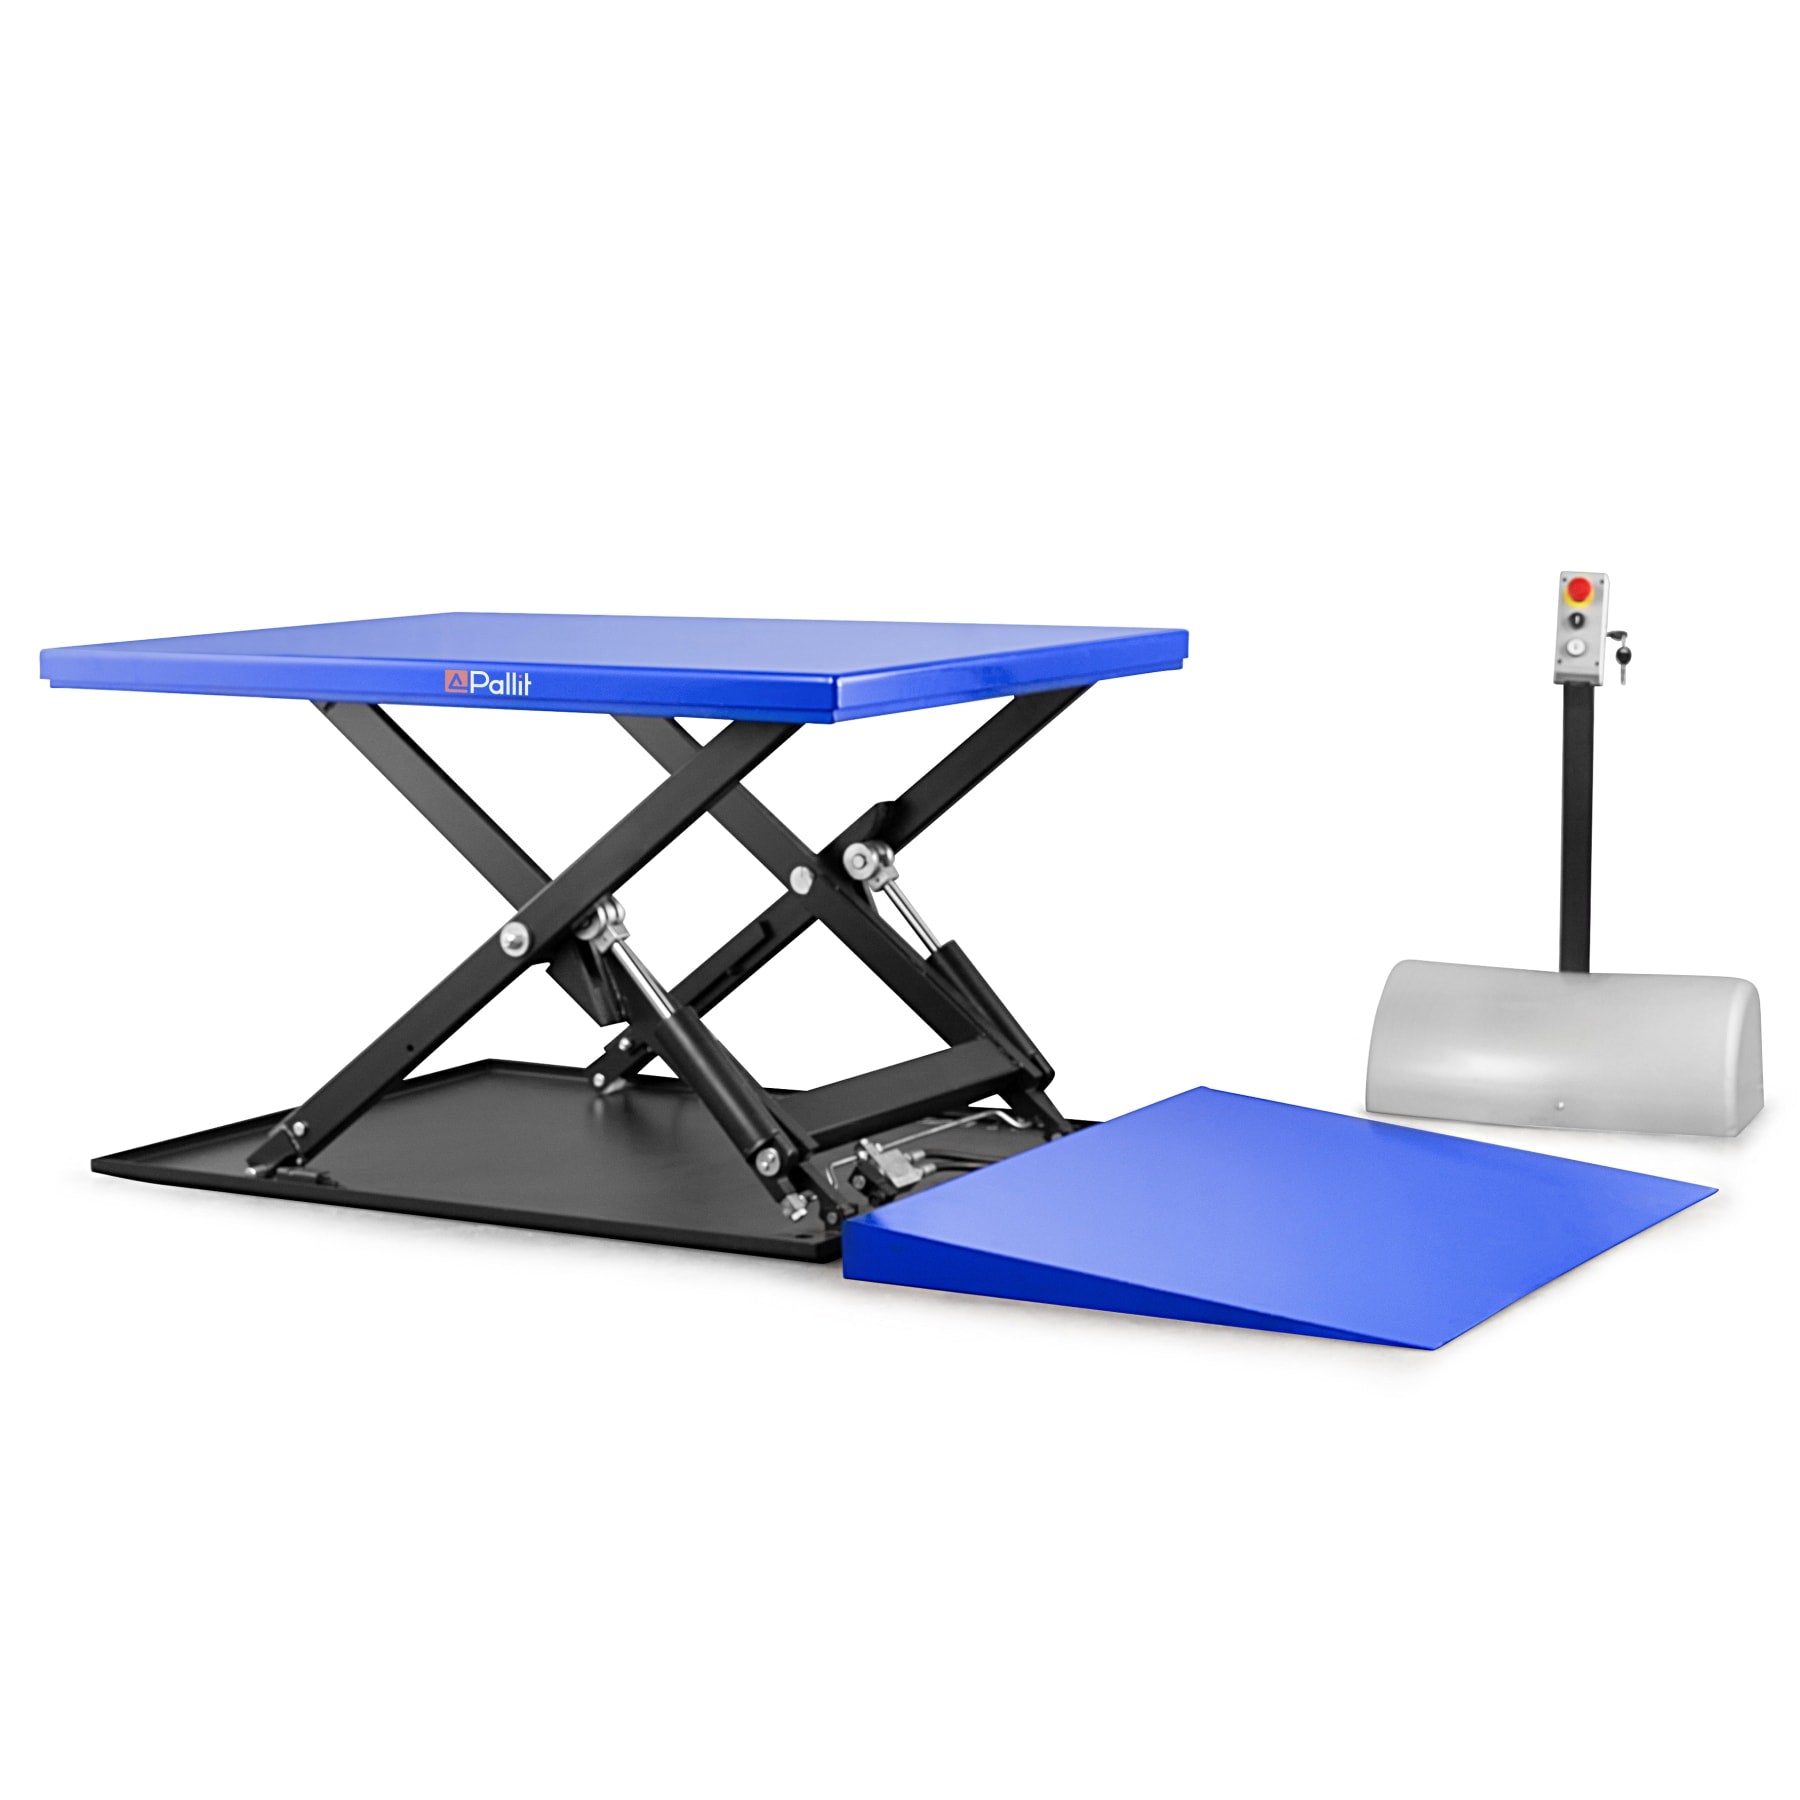 Low-Profile Scissor Lift Table TABLE-LOW with Ramp